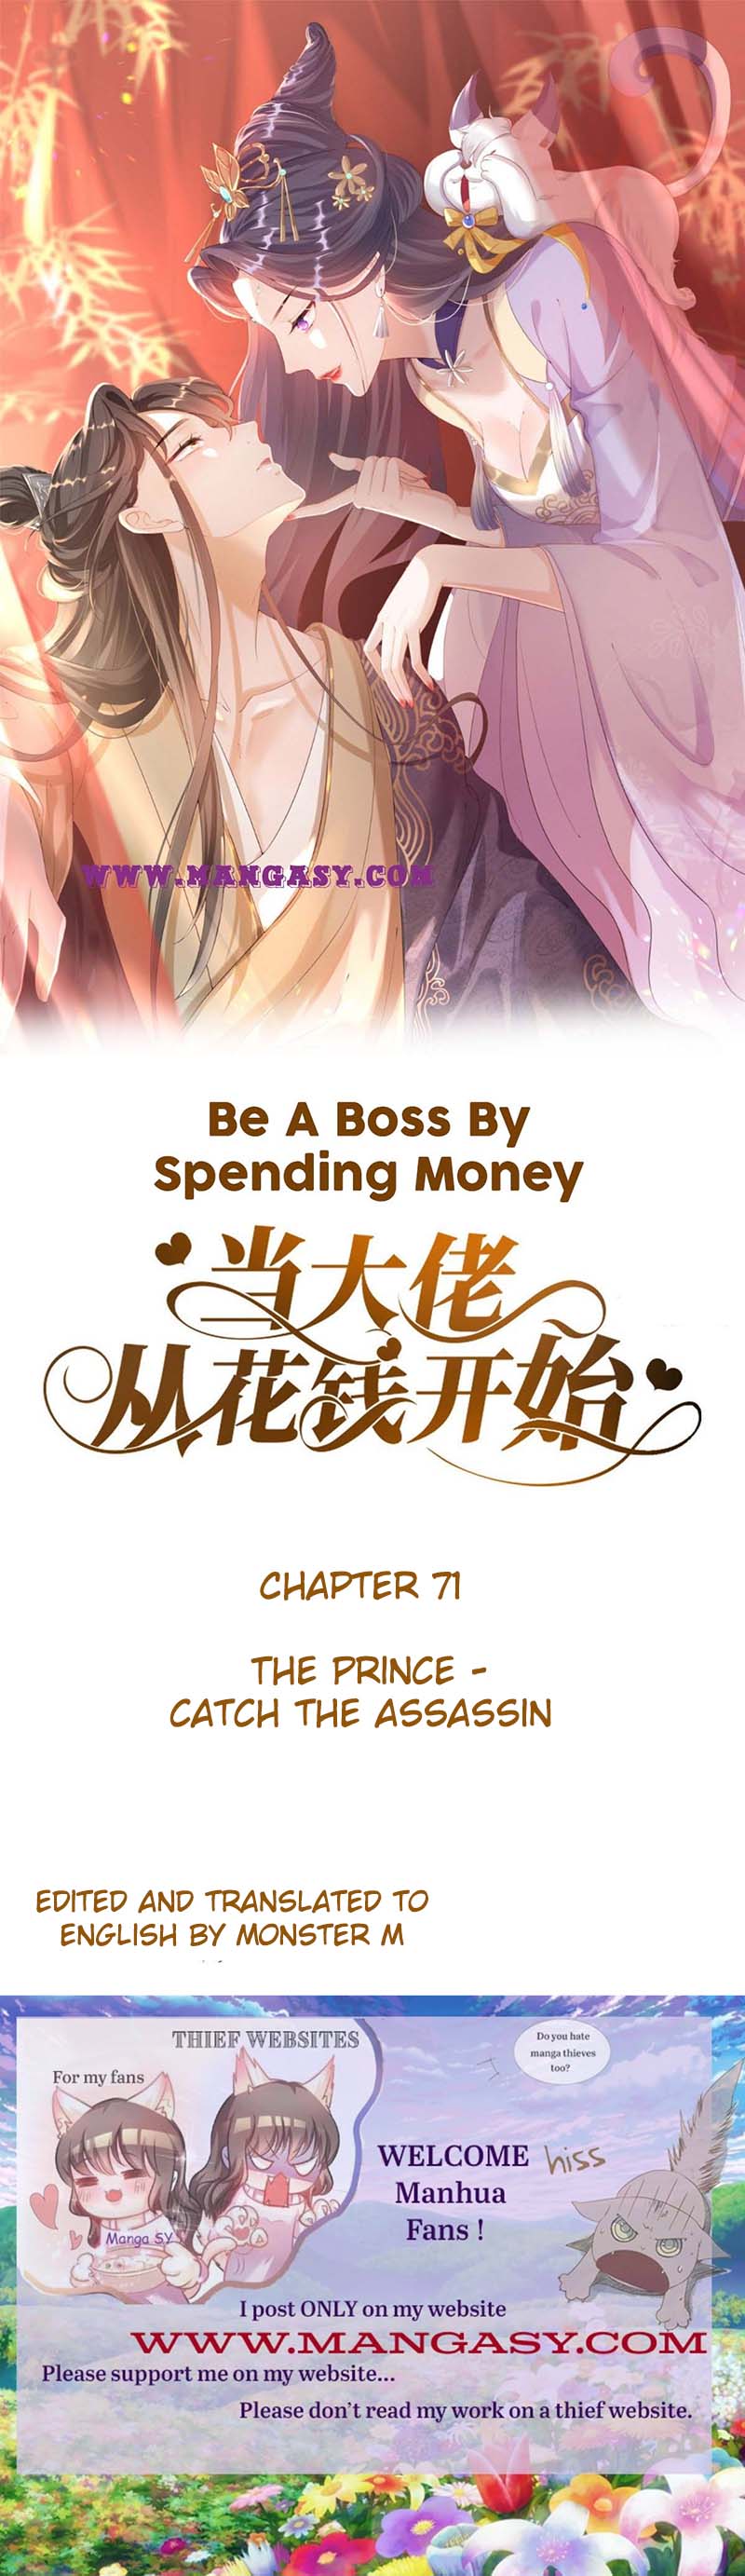 Becoming a Big Boss Starts with Spending Money chapter 71